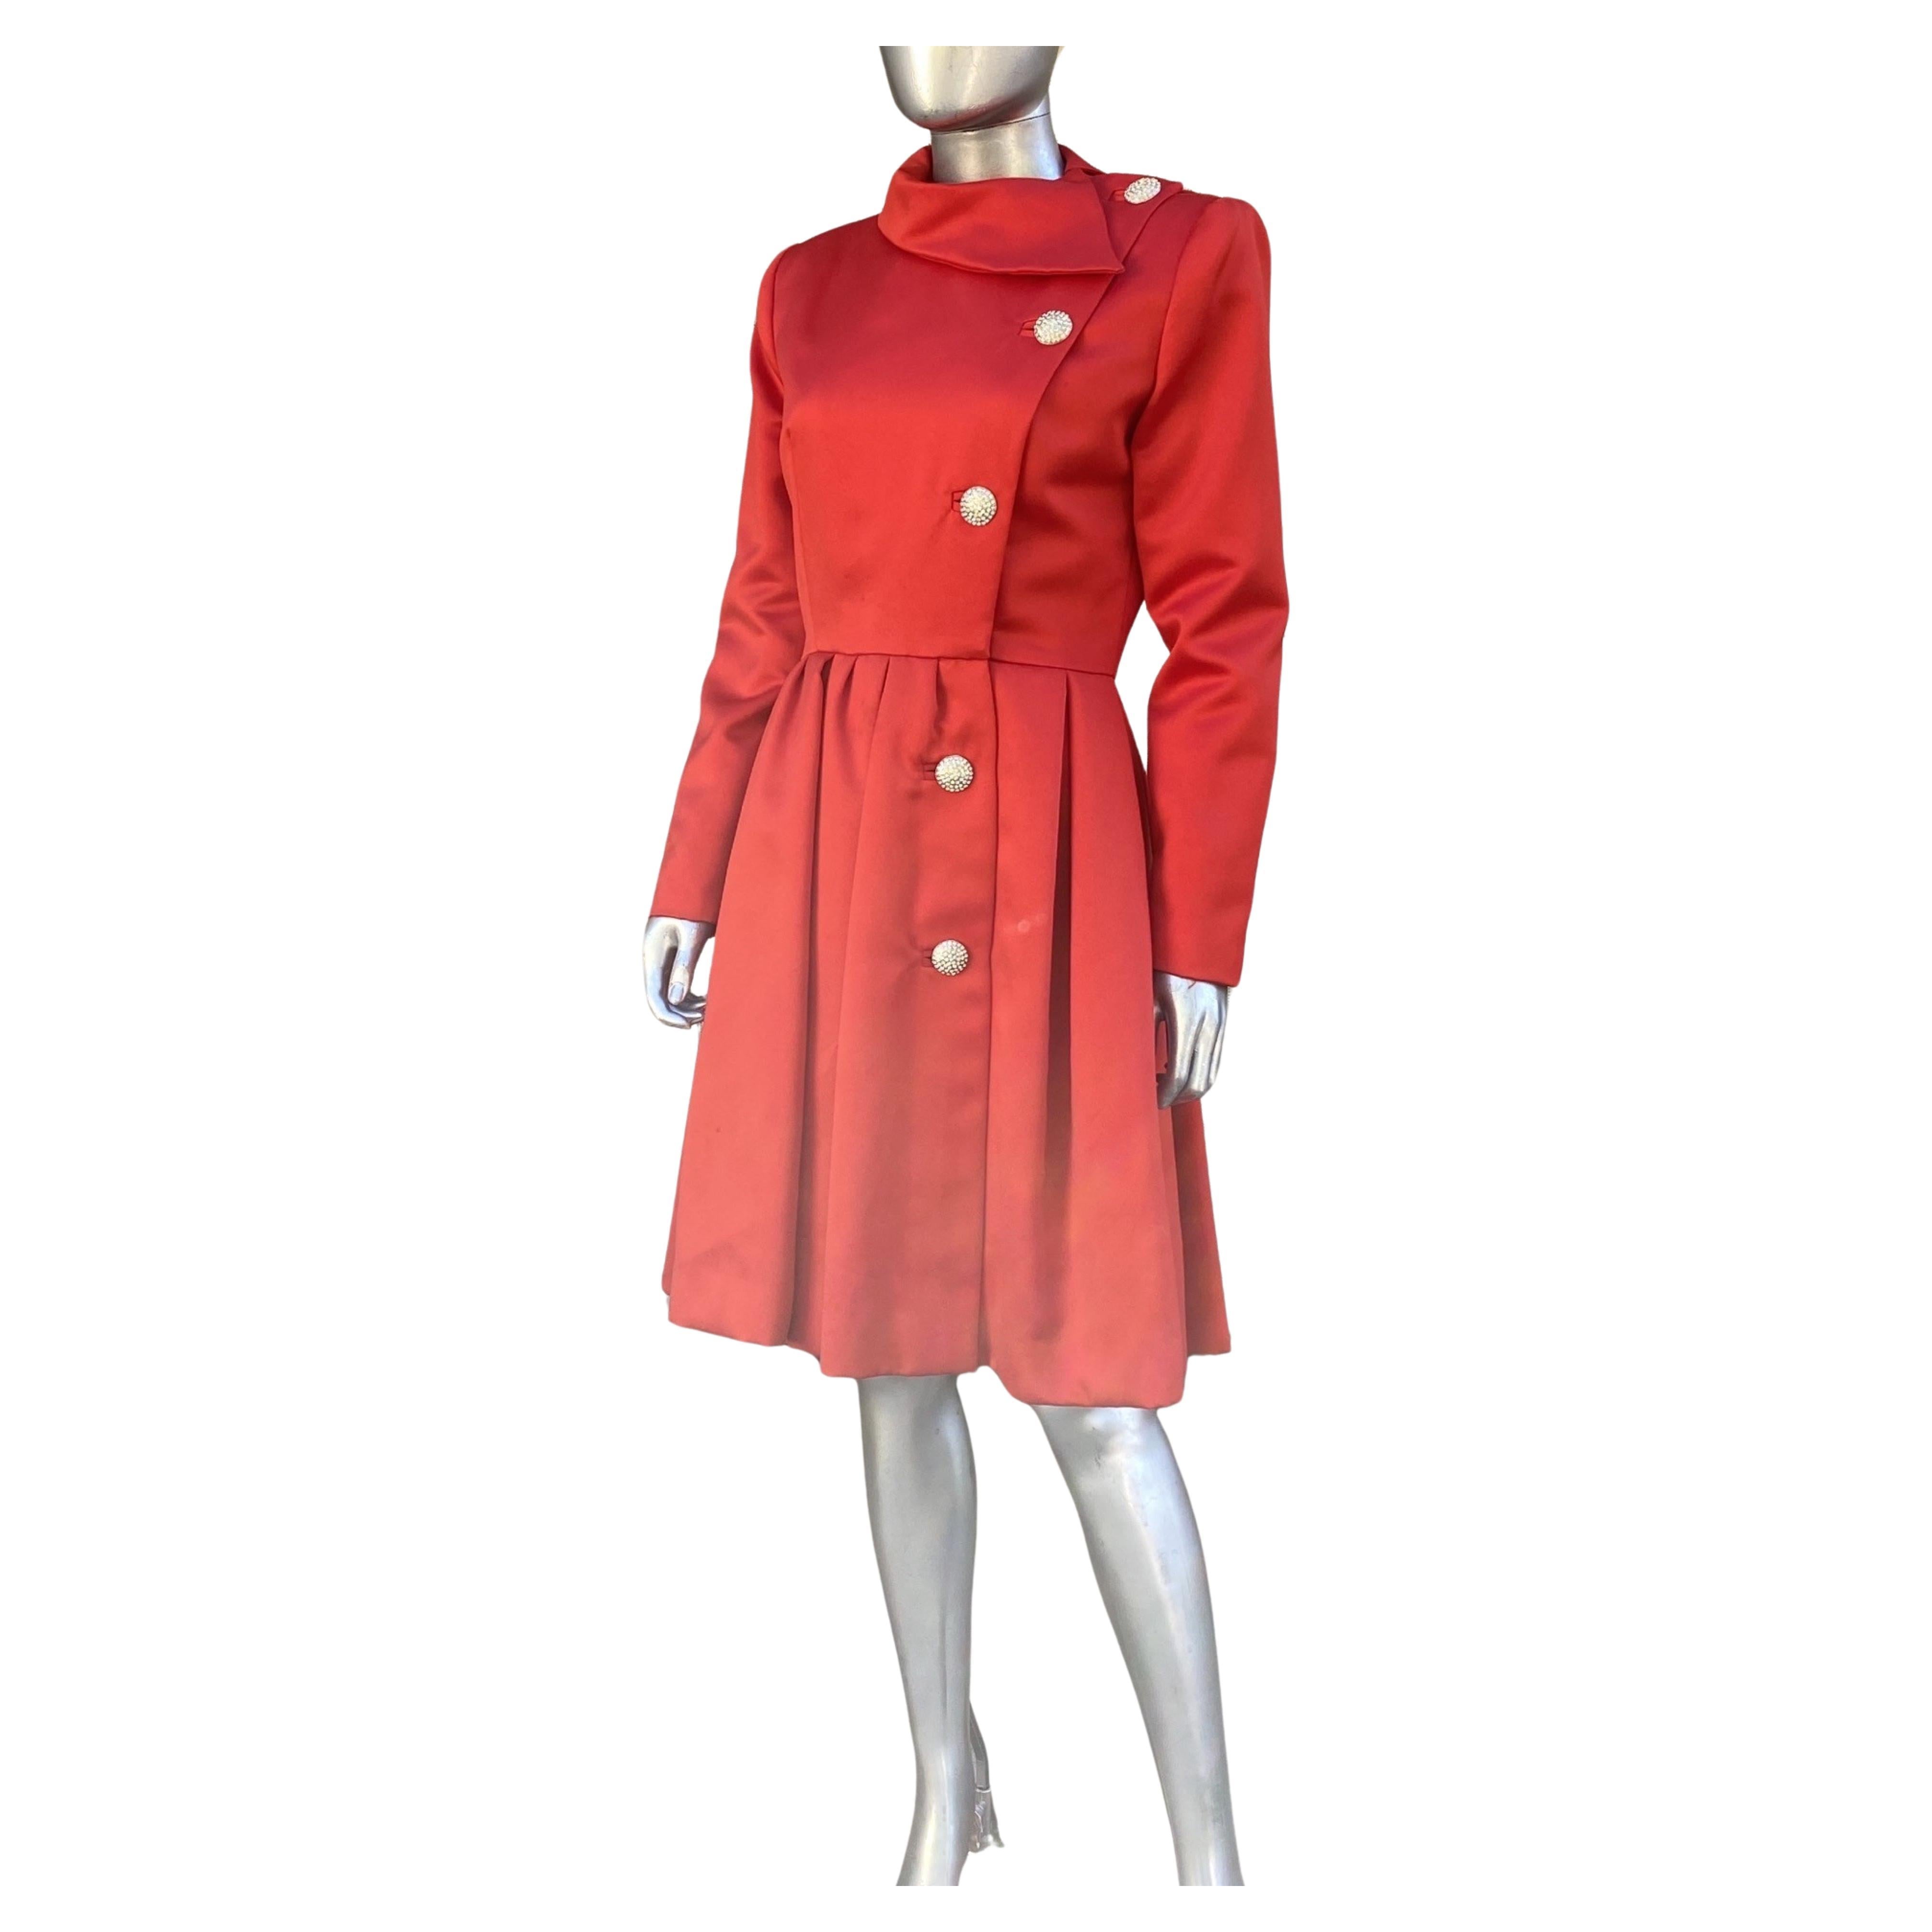 Red Satin and Rhinestone Button Coat Dress by Victor Costa Neiman Marcus Size 8 For Sale